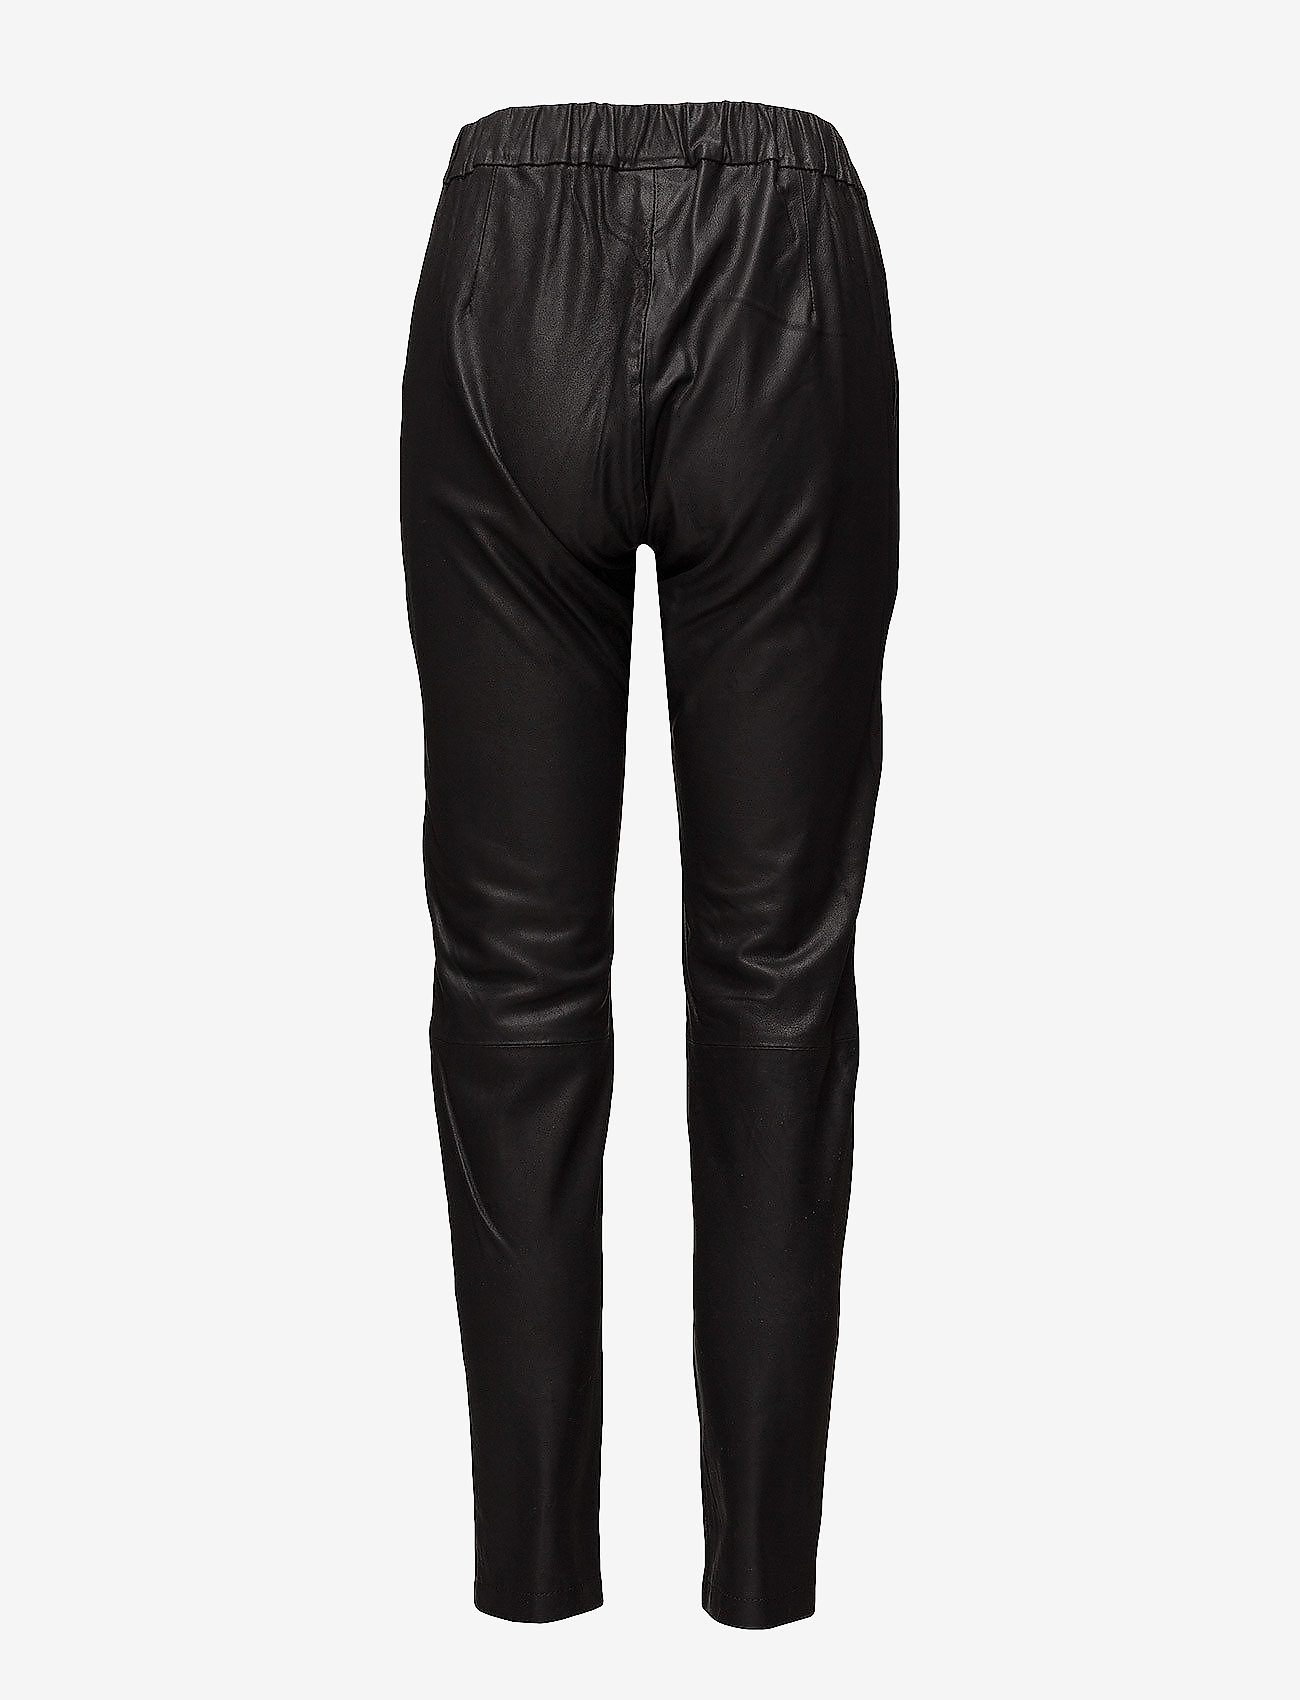 DEPECHE - Pant - party wear at outlet prices - black - 1